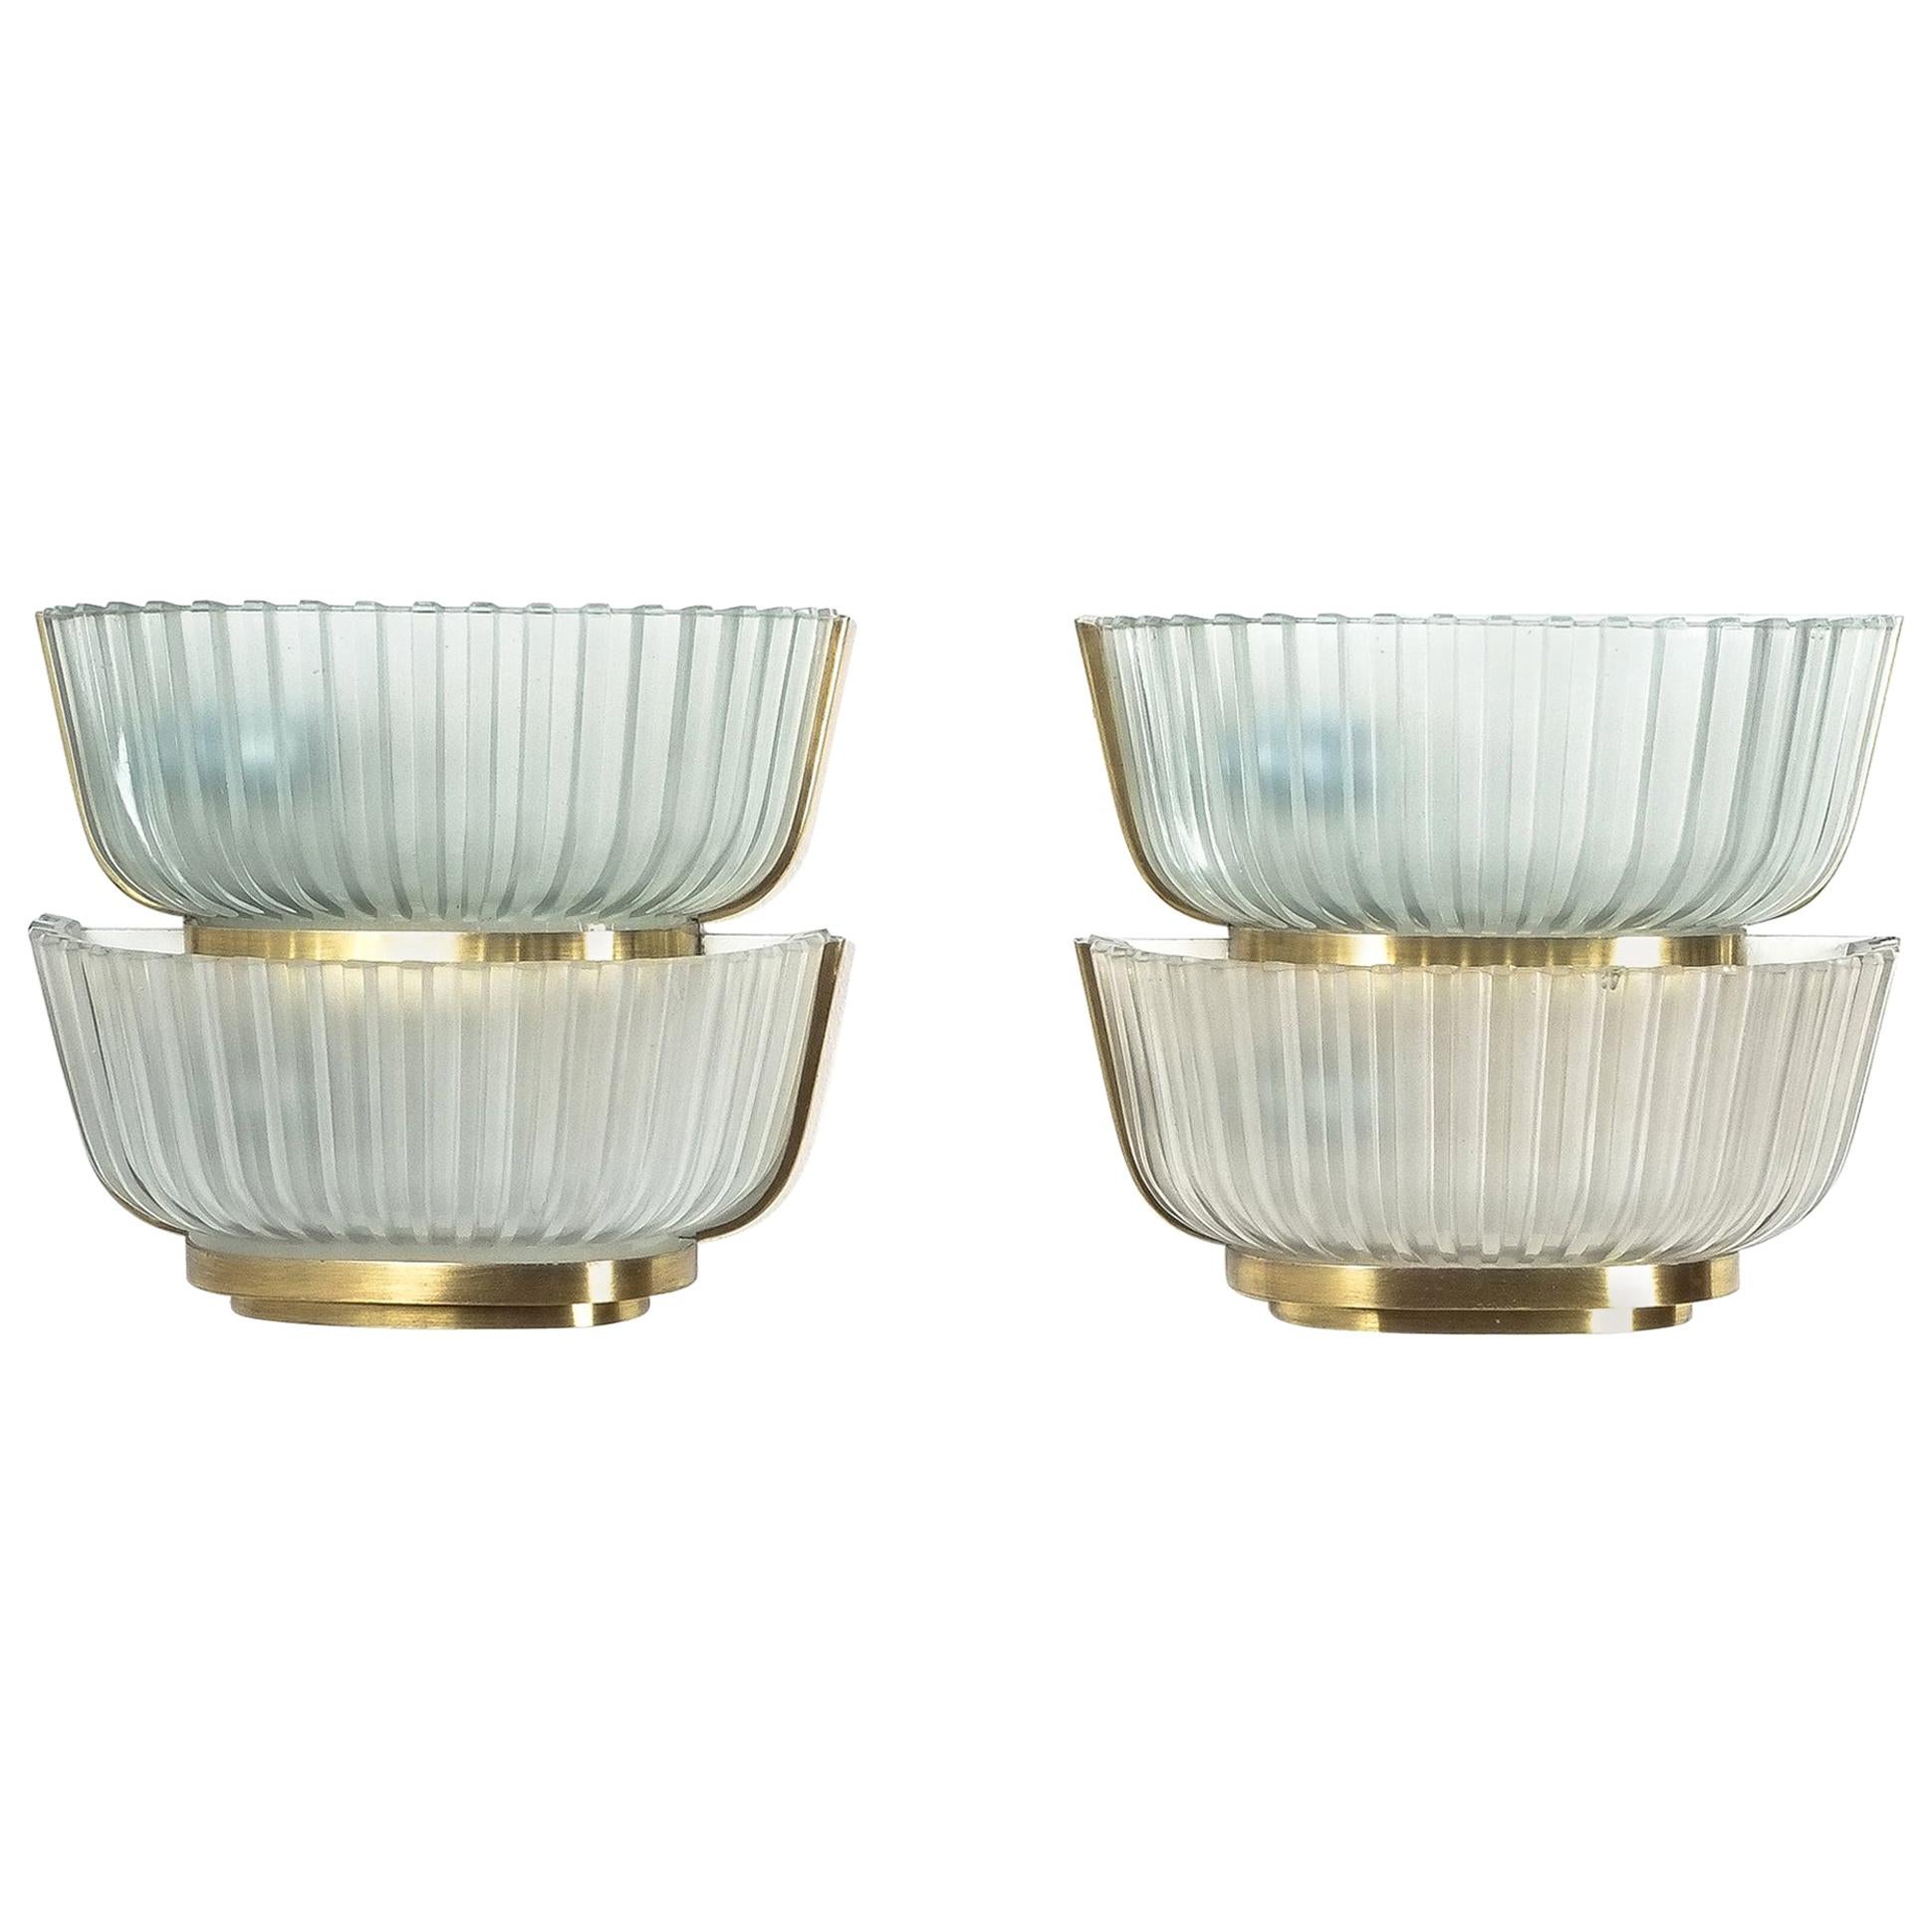 Pair of Late Art Deco Glass and Brass Sconces Refurbished, Italy, circa 1940